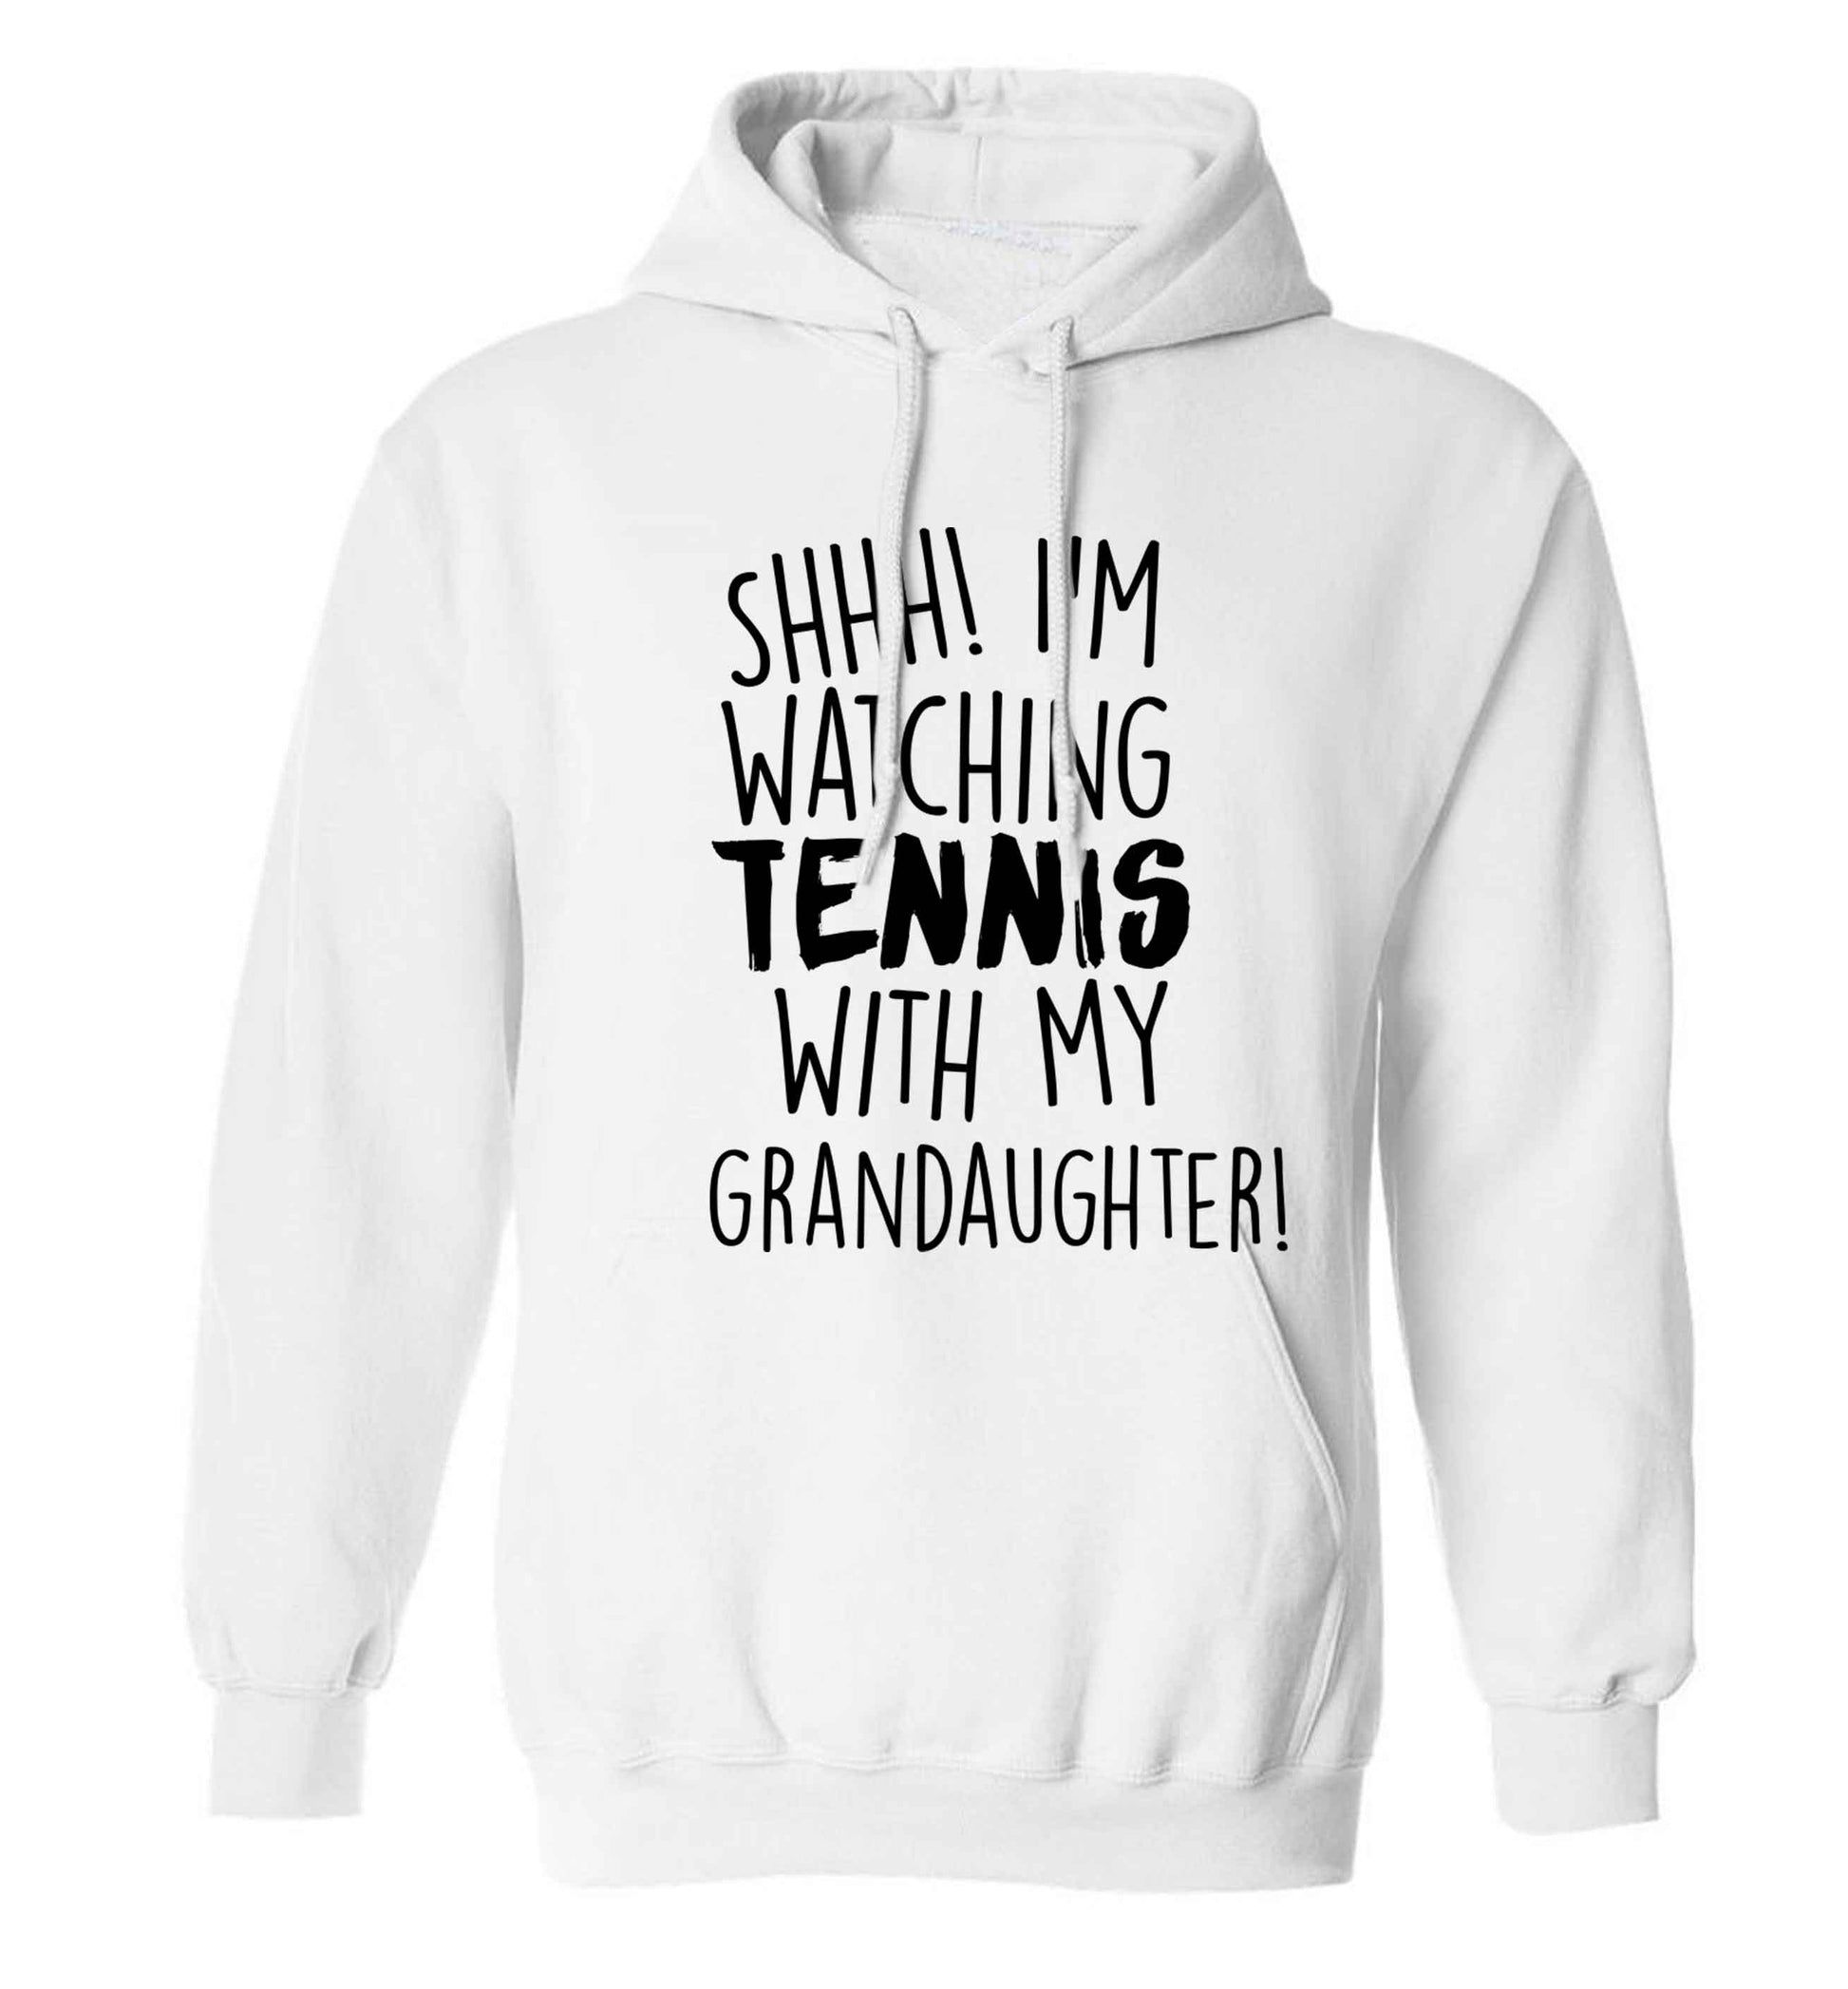 Shh! I'm watching tennis with my granddaughter! adults unisex white hoodie 2XL